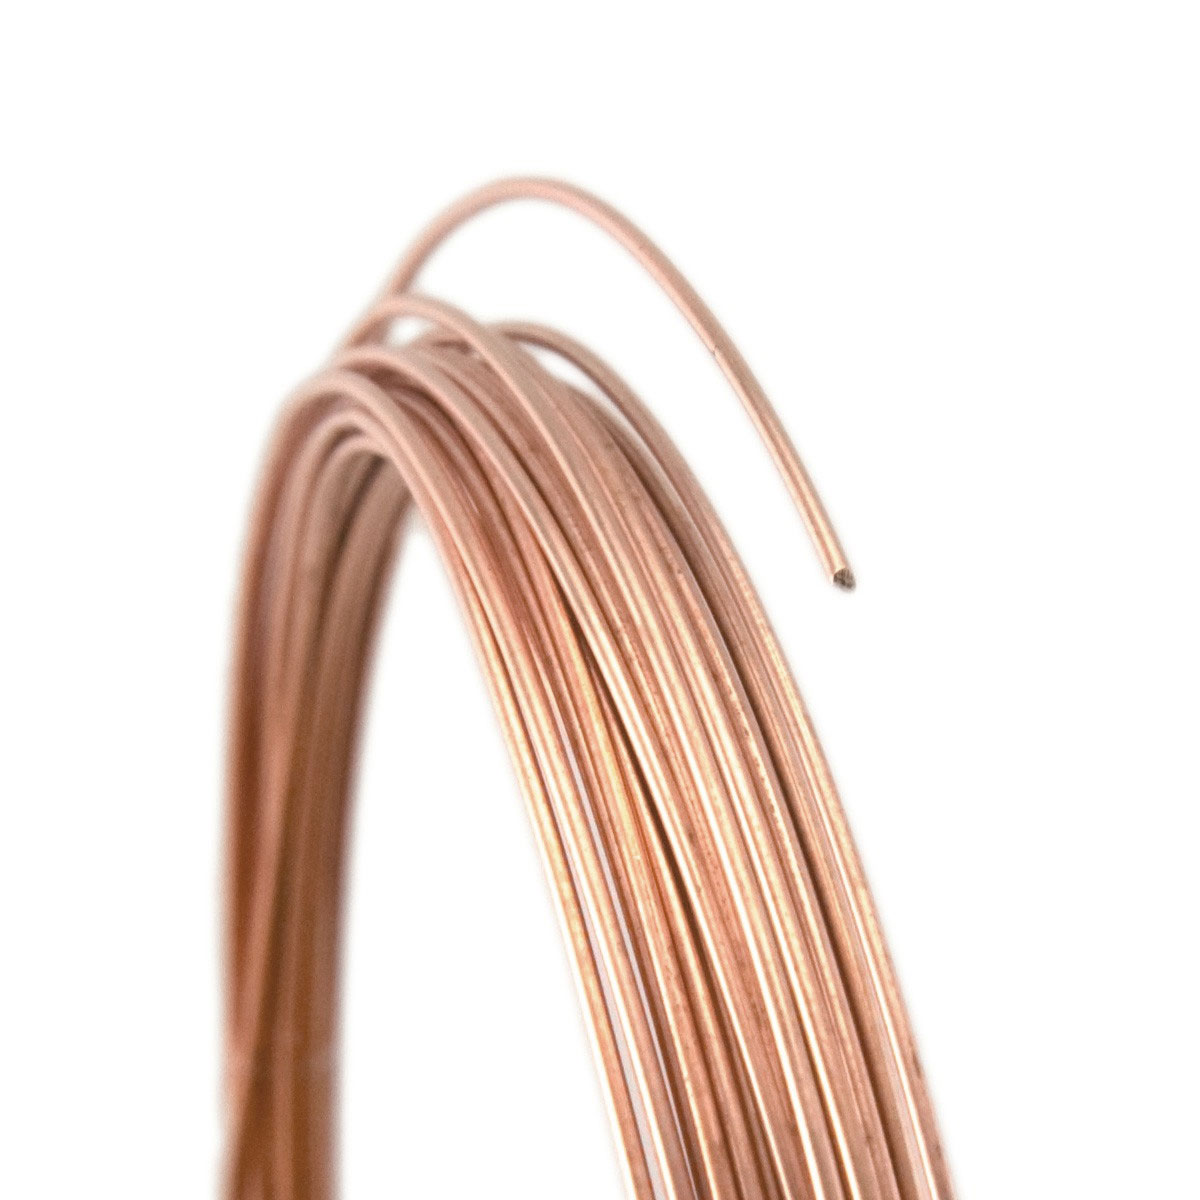 22 Gauge Round Half Hard 14/20 Rose Gold Filled Wire: Jewelry Making  Supplies, Instructions